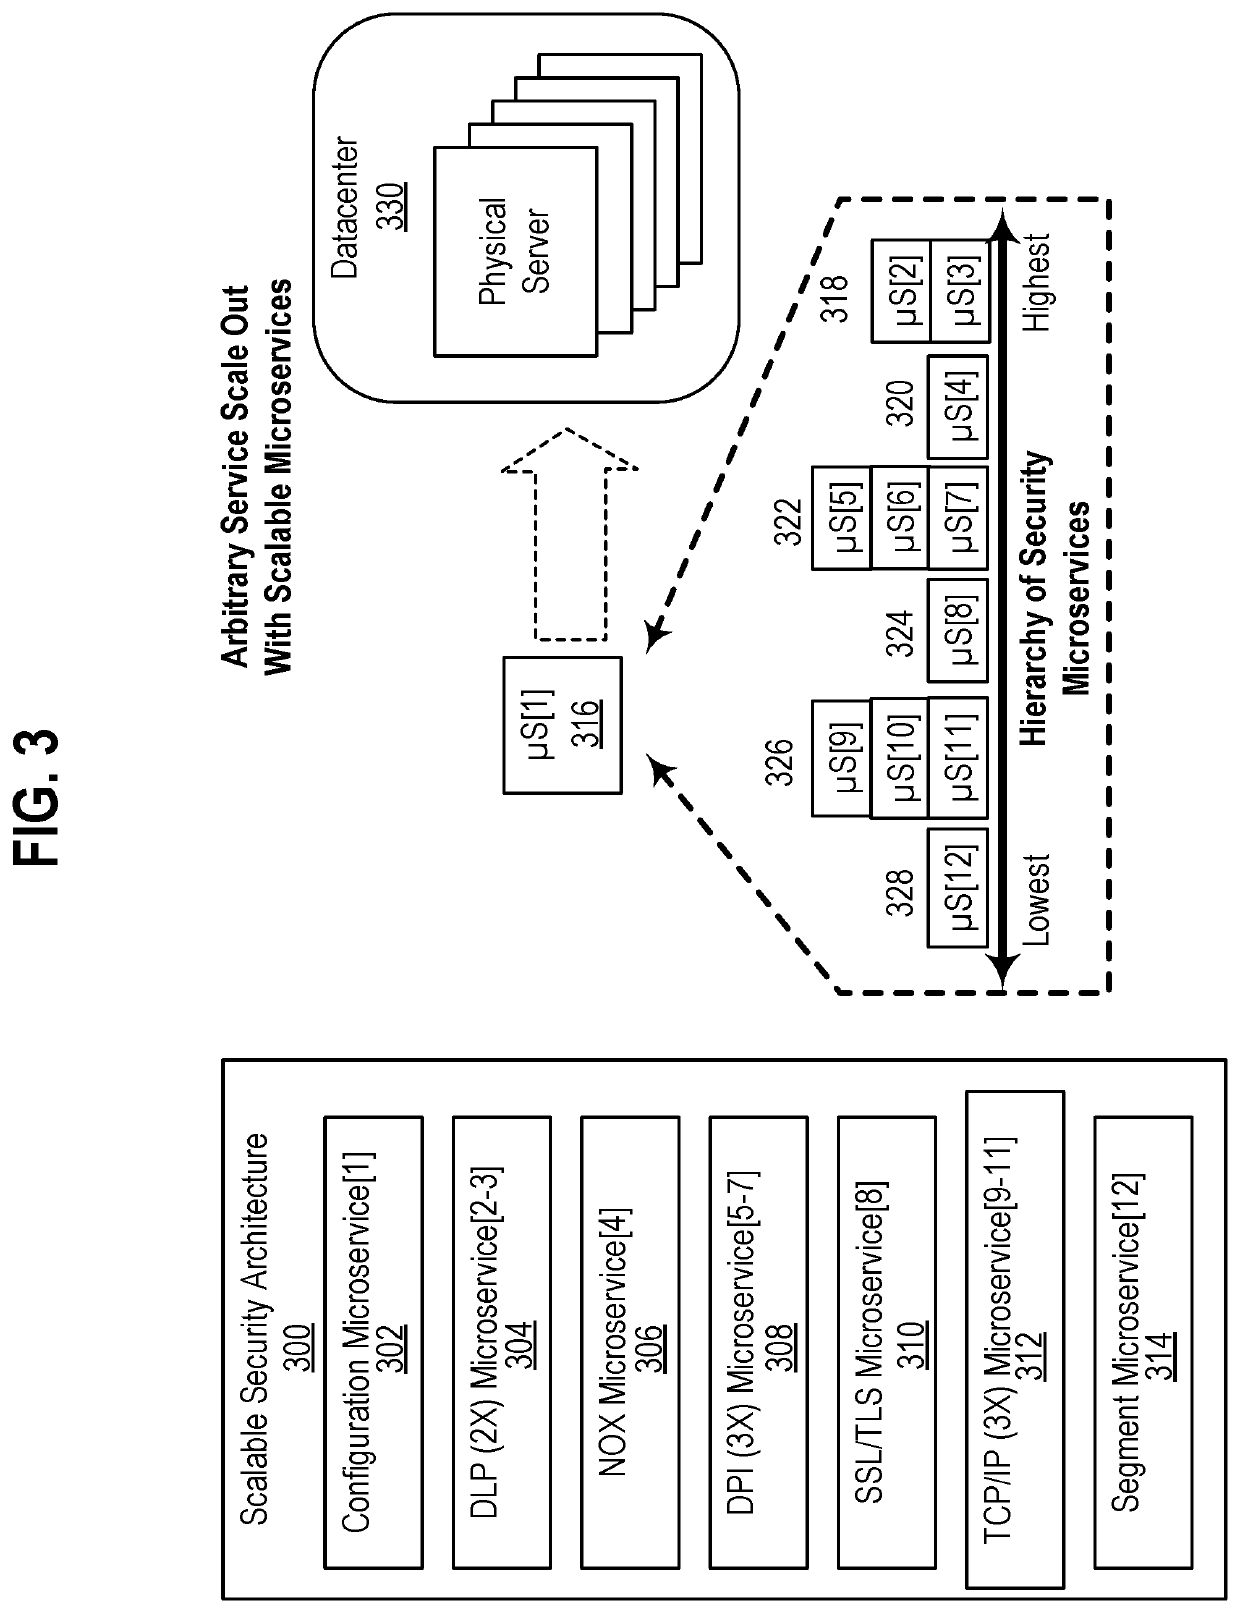 Systems and methods for managing endpoints and security policies in a networked environment